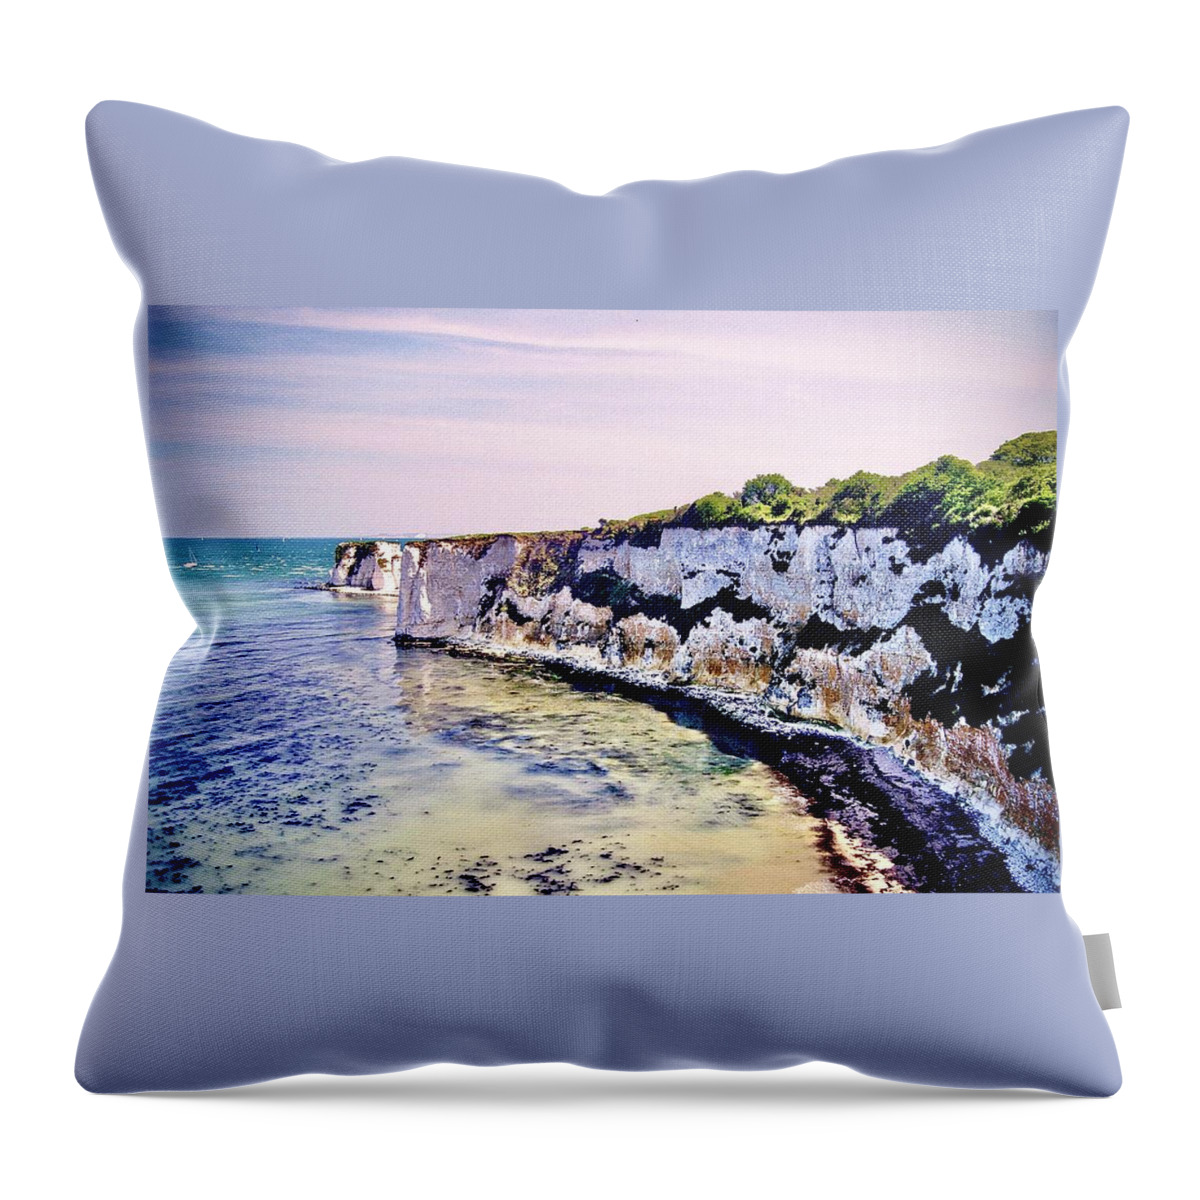  Throw Pillow featuring the photograph The Jurassic Coast #2 by Gordon James